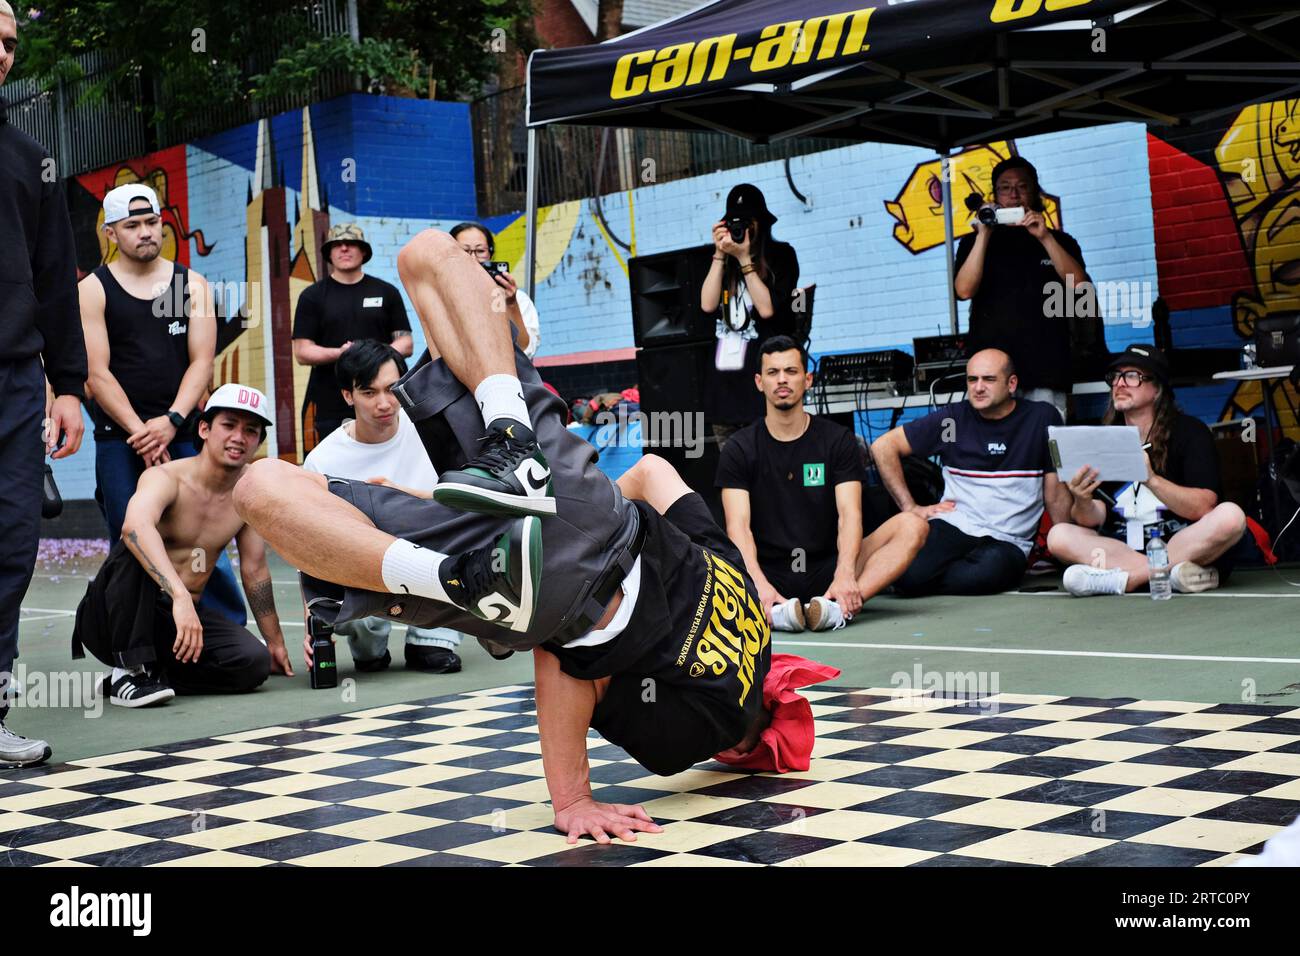 Head slide freeze, one arm down, Bboy with legs folded back breakdancing competition and battle performing Woolloomooloo, Sydney Stock Photo